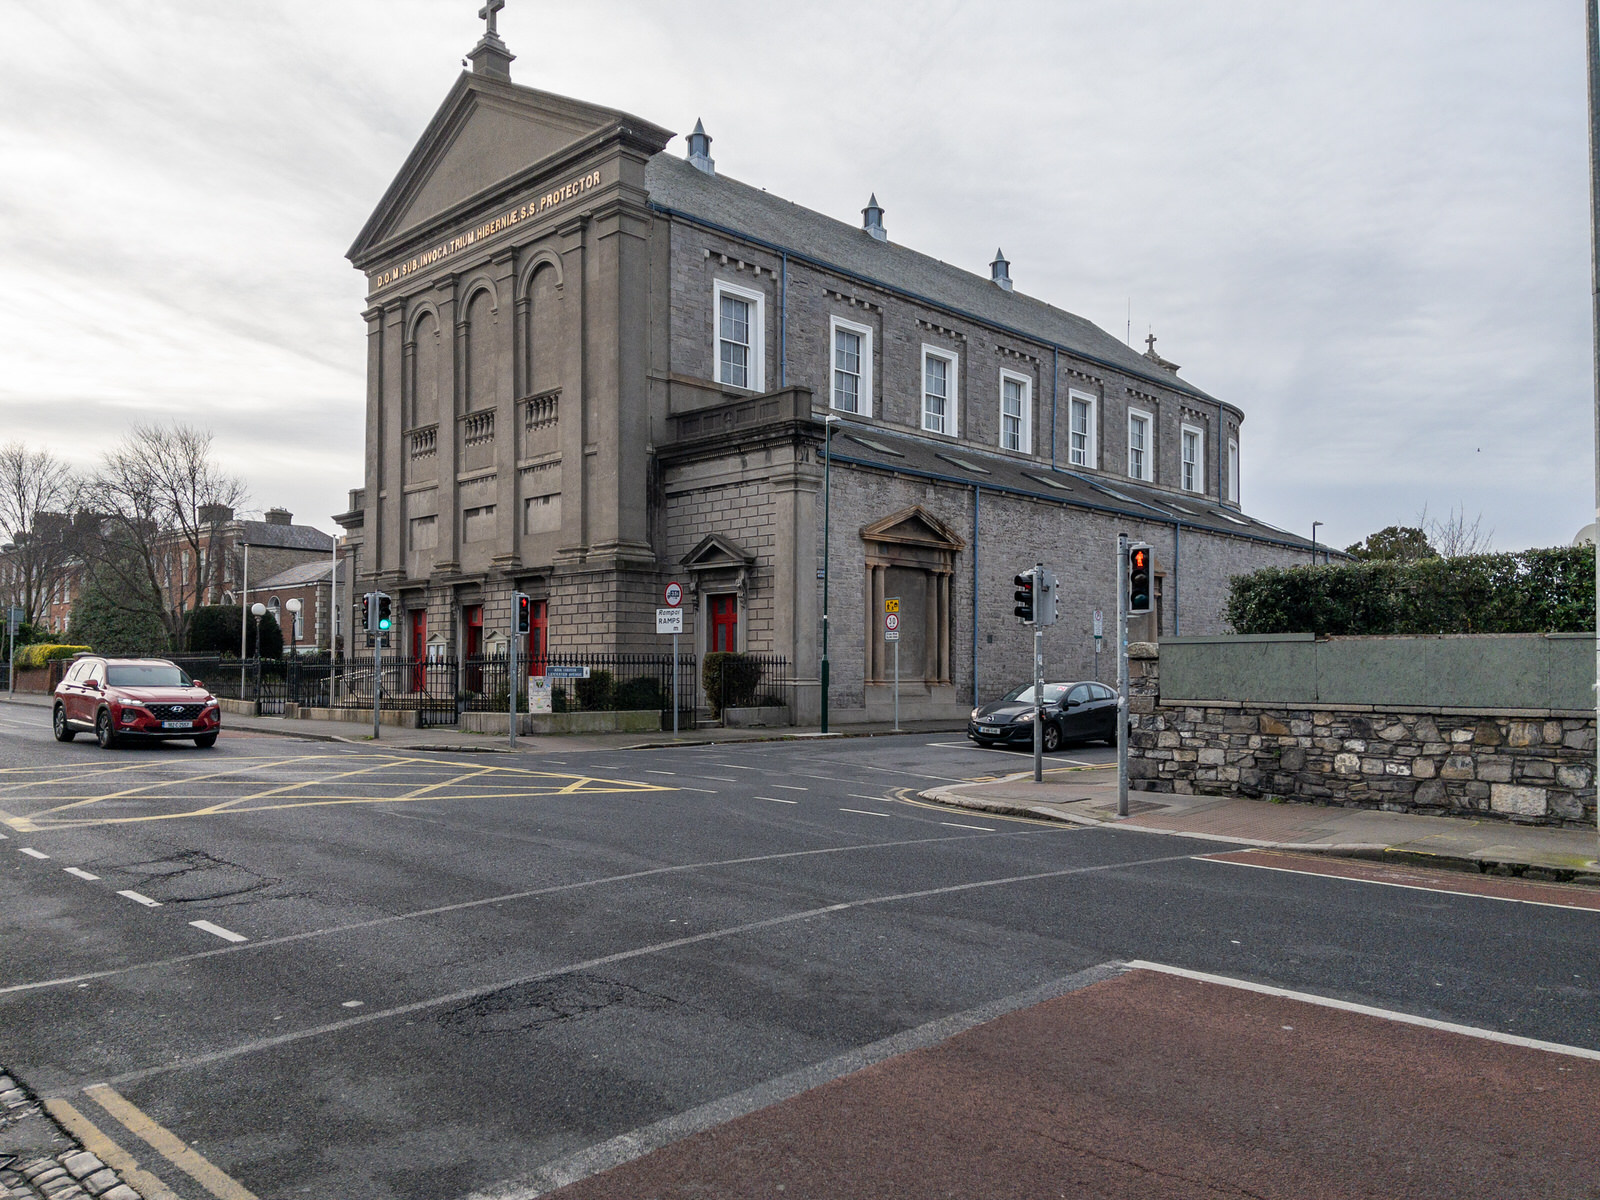 CHURCH OF THE THREE PATRONS IN RATHGAR